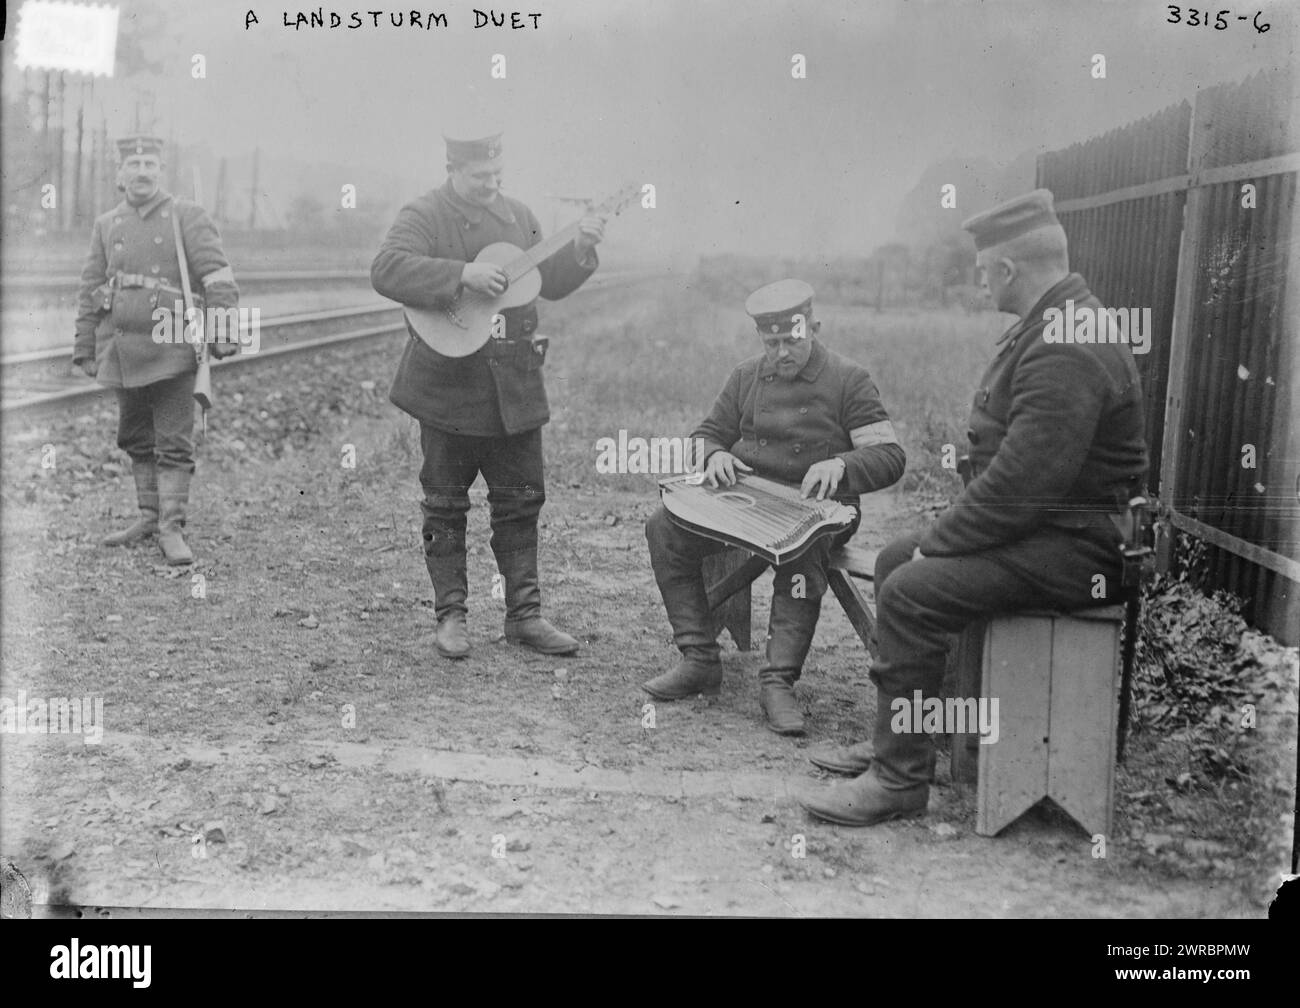 A Landsturm Duet, Photograph shows men playing stringed instruments by the railroad tracks during World War I., 1914, World War, 1914-1918, Glass negatives, 1 negative: glass Stock Photo